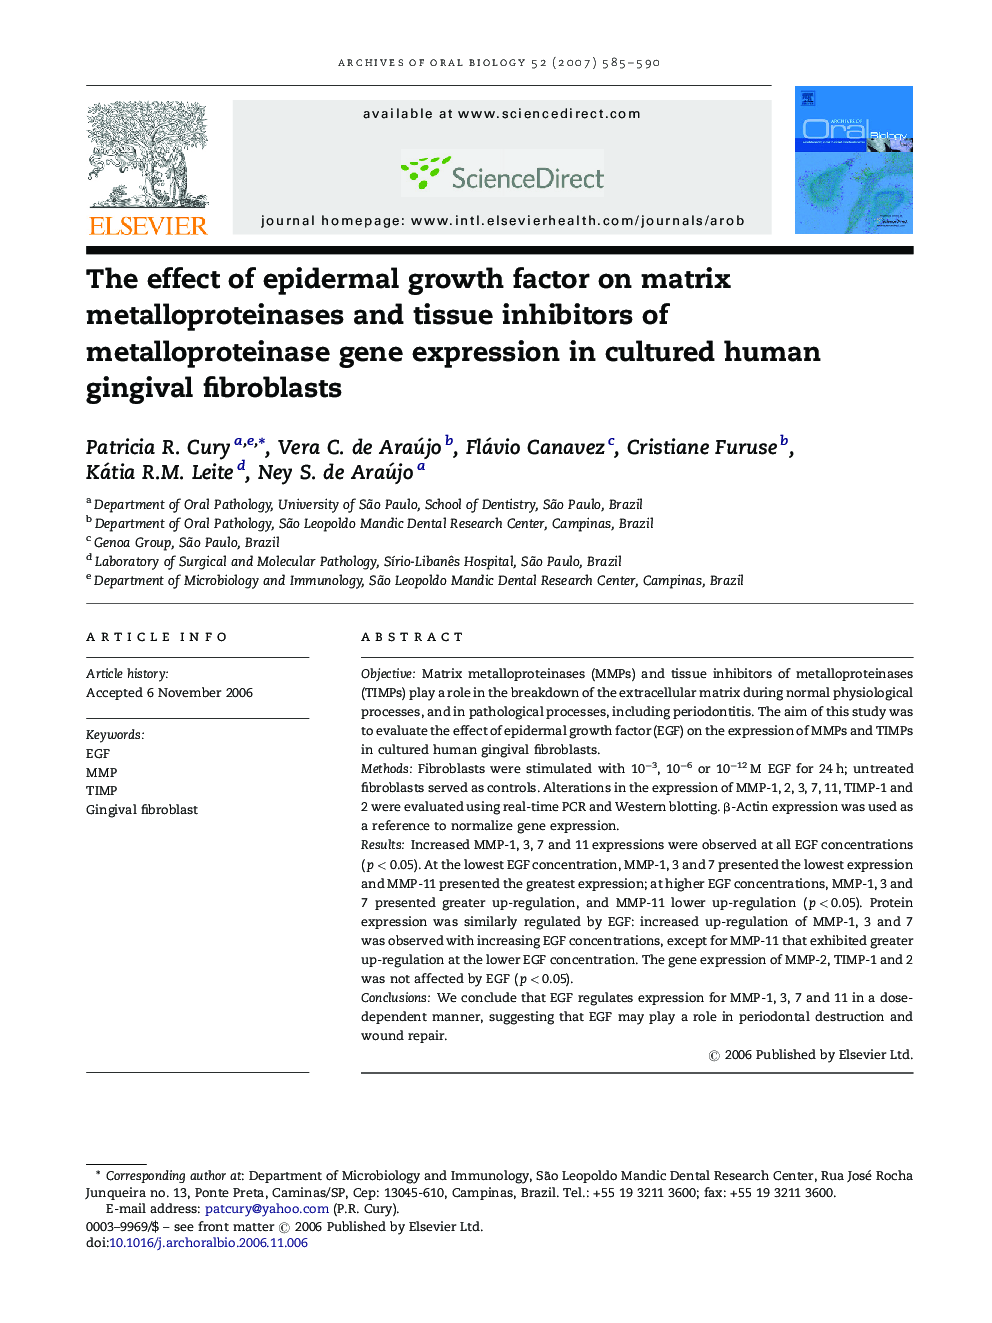 The effect of epidermal growth factor on matrix metalloproteinases and tissue inhibitors of metalloproteinase gene expression in cultured human gingival fibroblasts